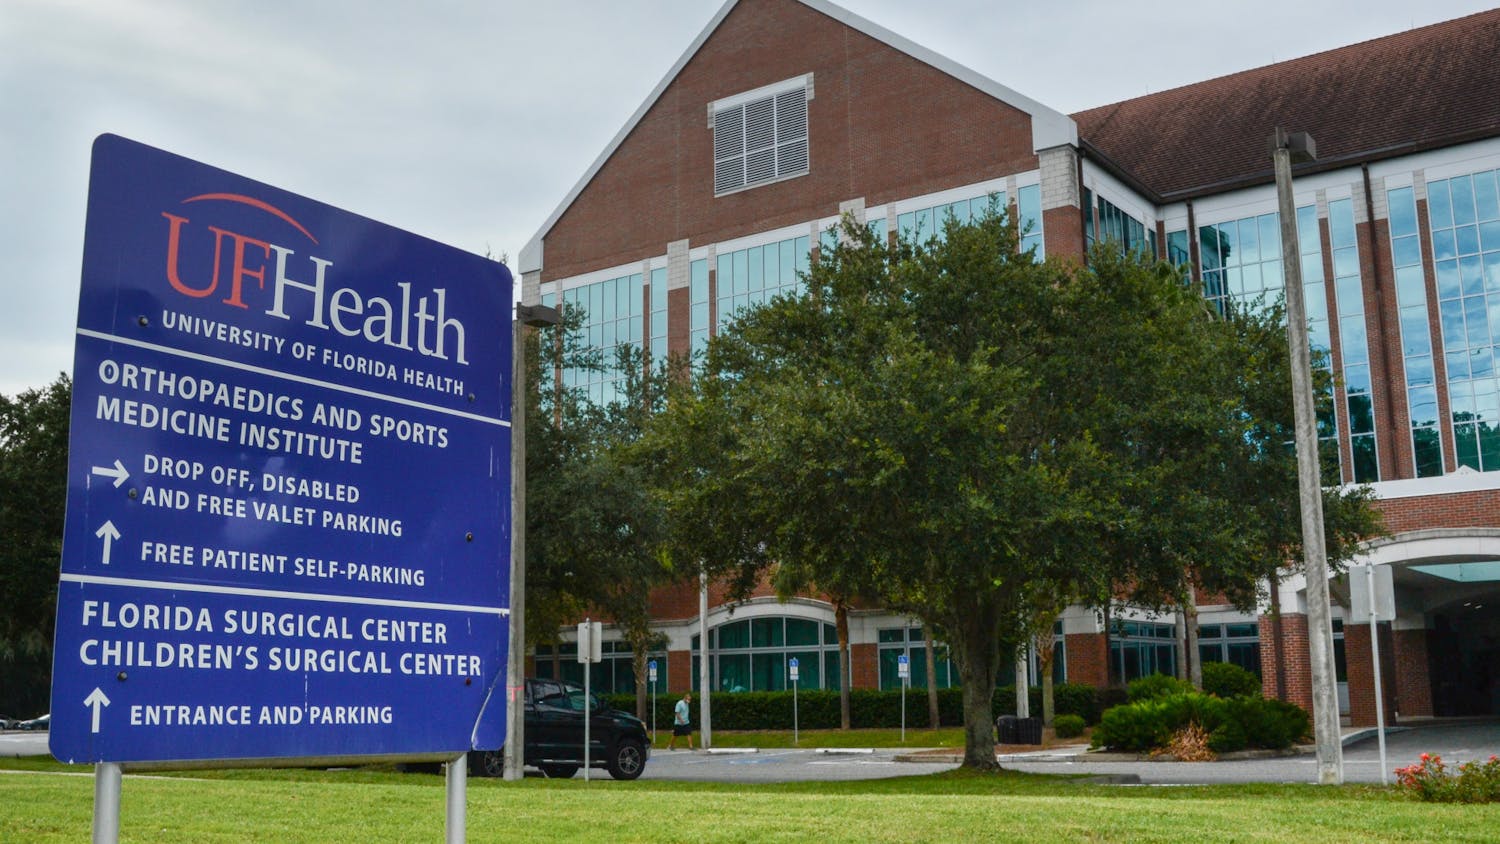 The UF Health Orthopaedics ans Sports Medicine Institute, located at 3450 SW Hull Road on Tuesday, July 27, 2021. The building, which houses comprehensive rehabilitation services, is one of many UF College of Medicine ventures operating under the new department of physical medicine and rehabilitation, the college’s first new clinical department in 30 years.